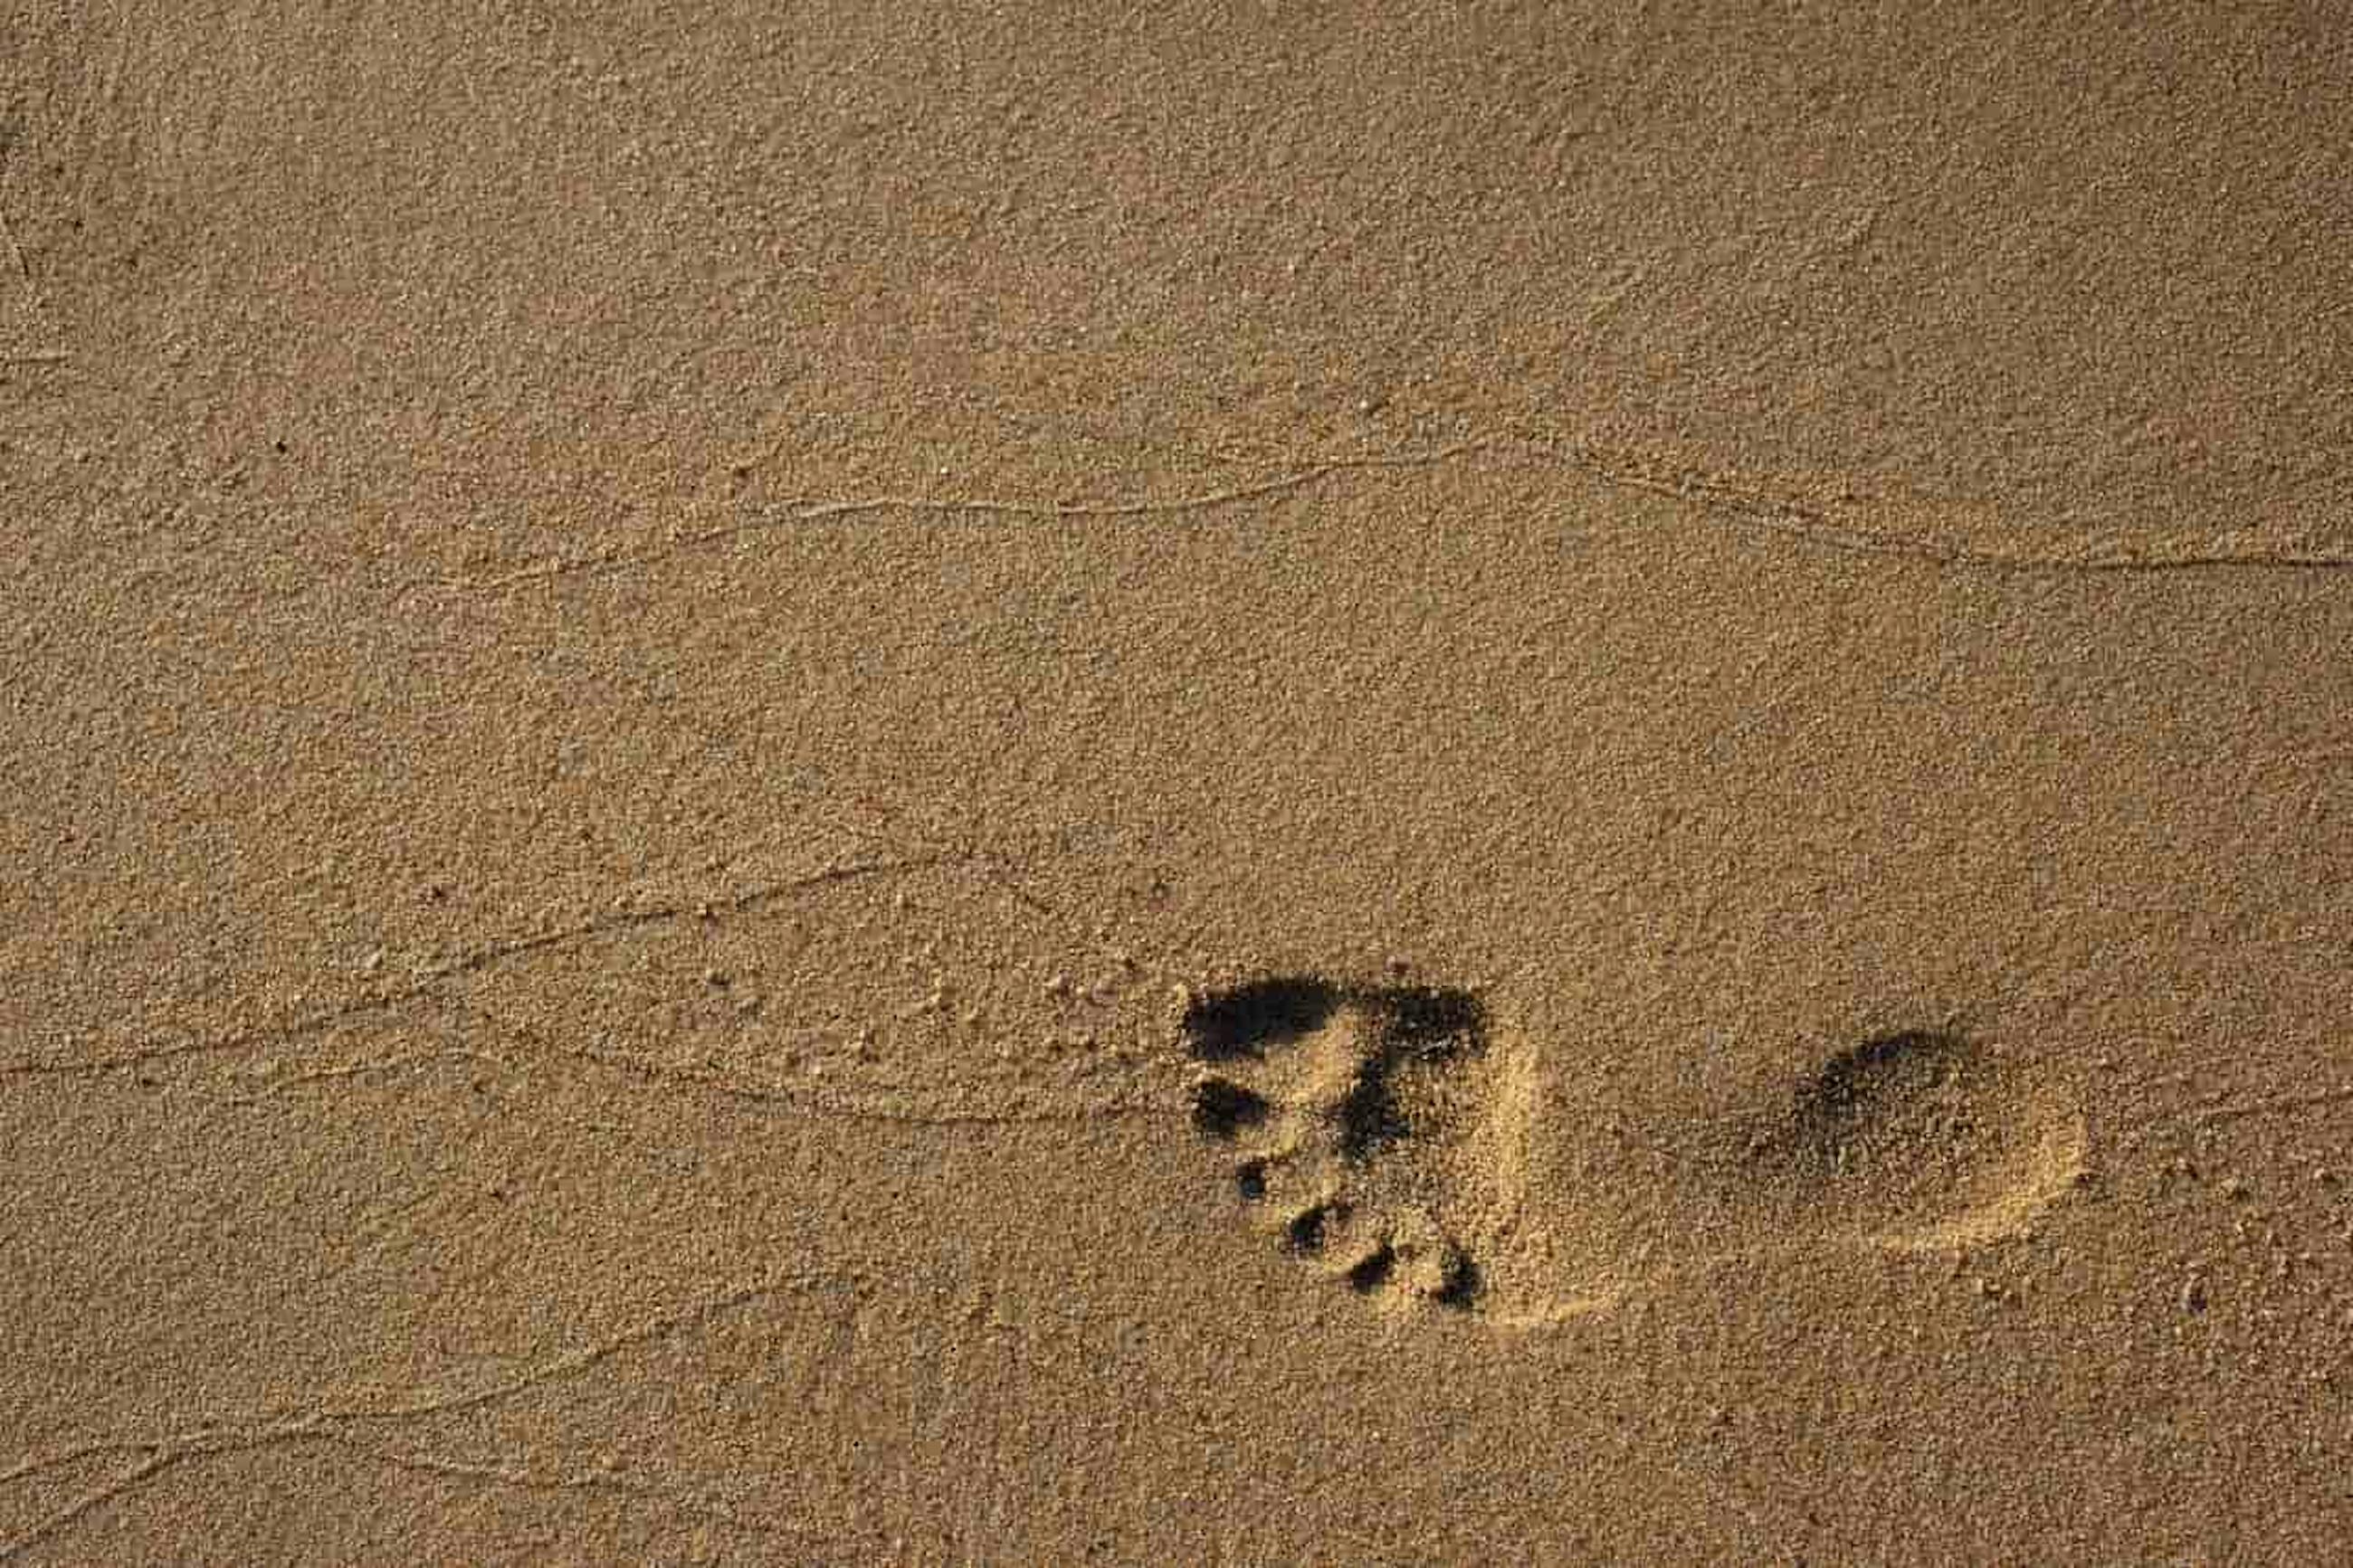 A footprint in the sand 